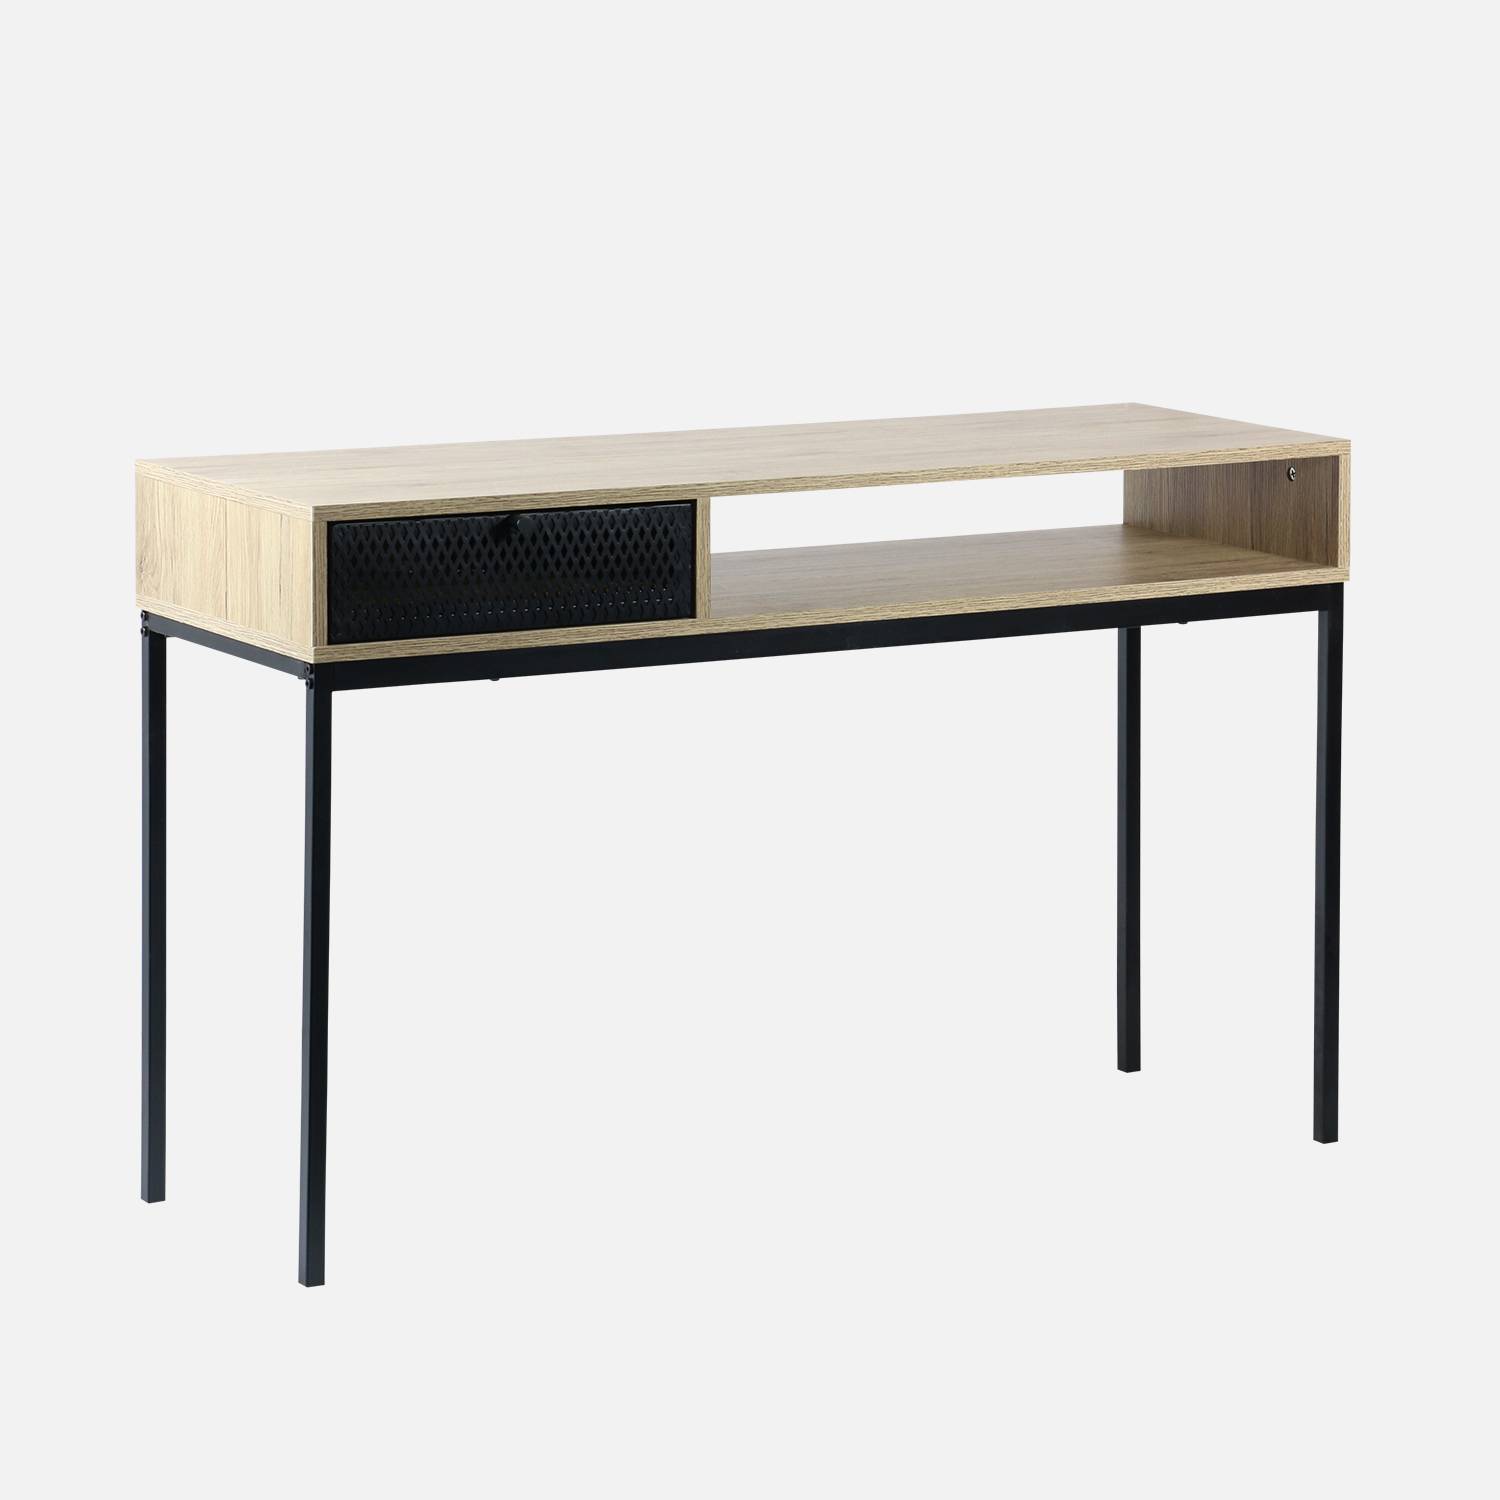 120cm Metal and wood-style hallway console table with storage nook, drawer & industrial metal legs - Brooklyn,sweeek,Photo3